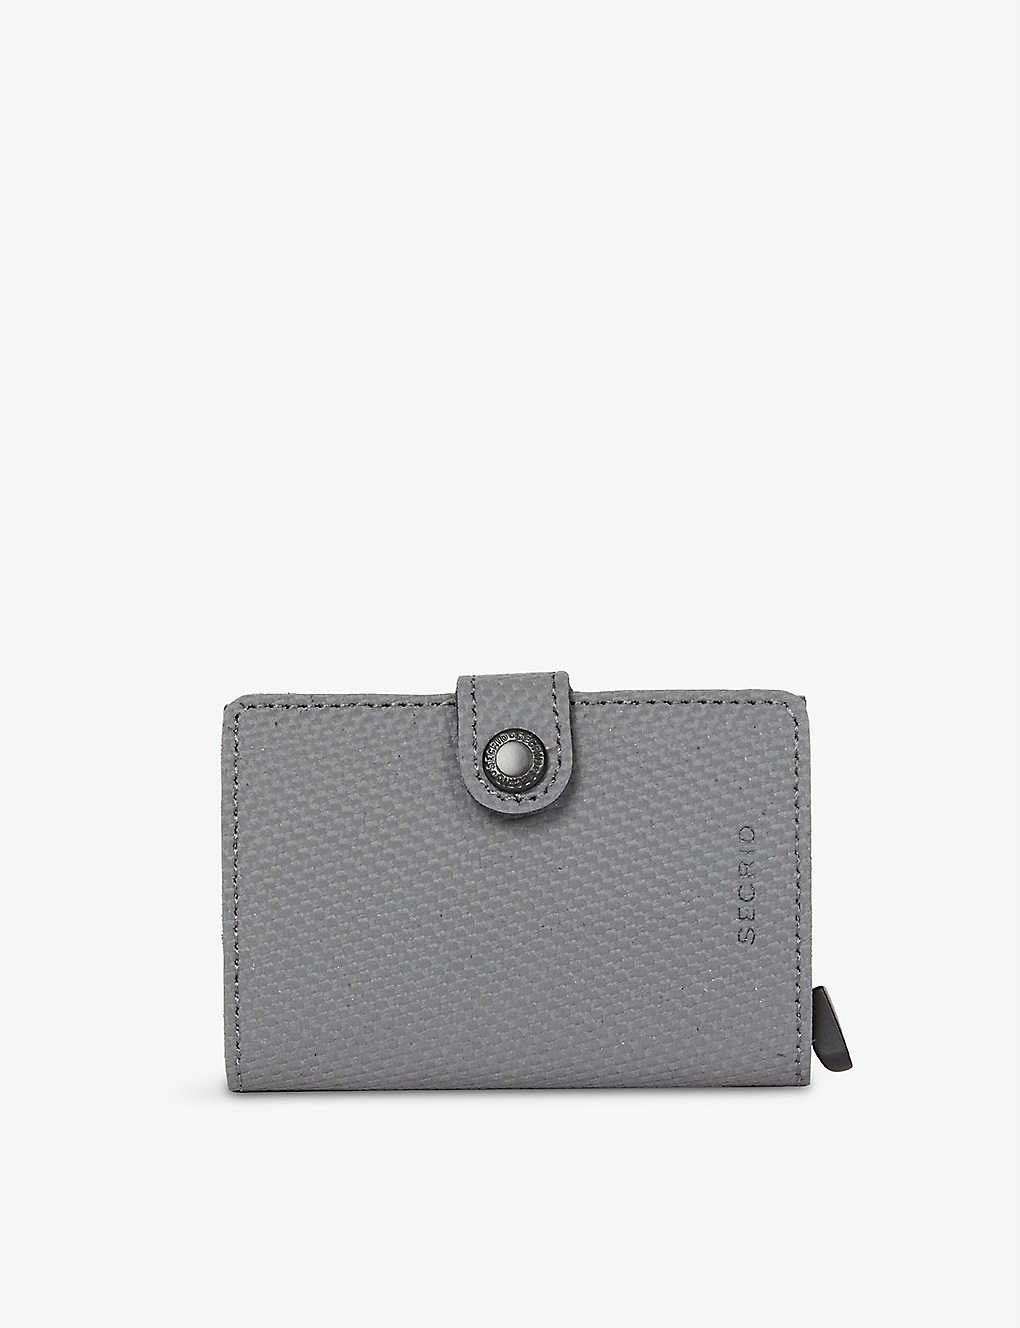 Secrid Miniwallet Leather And Aluminium Wallet In Cool Grey